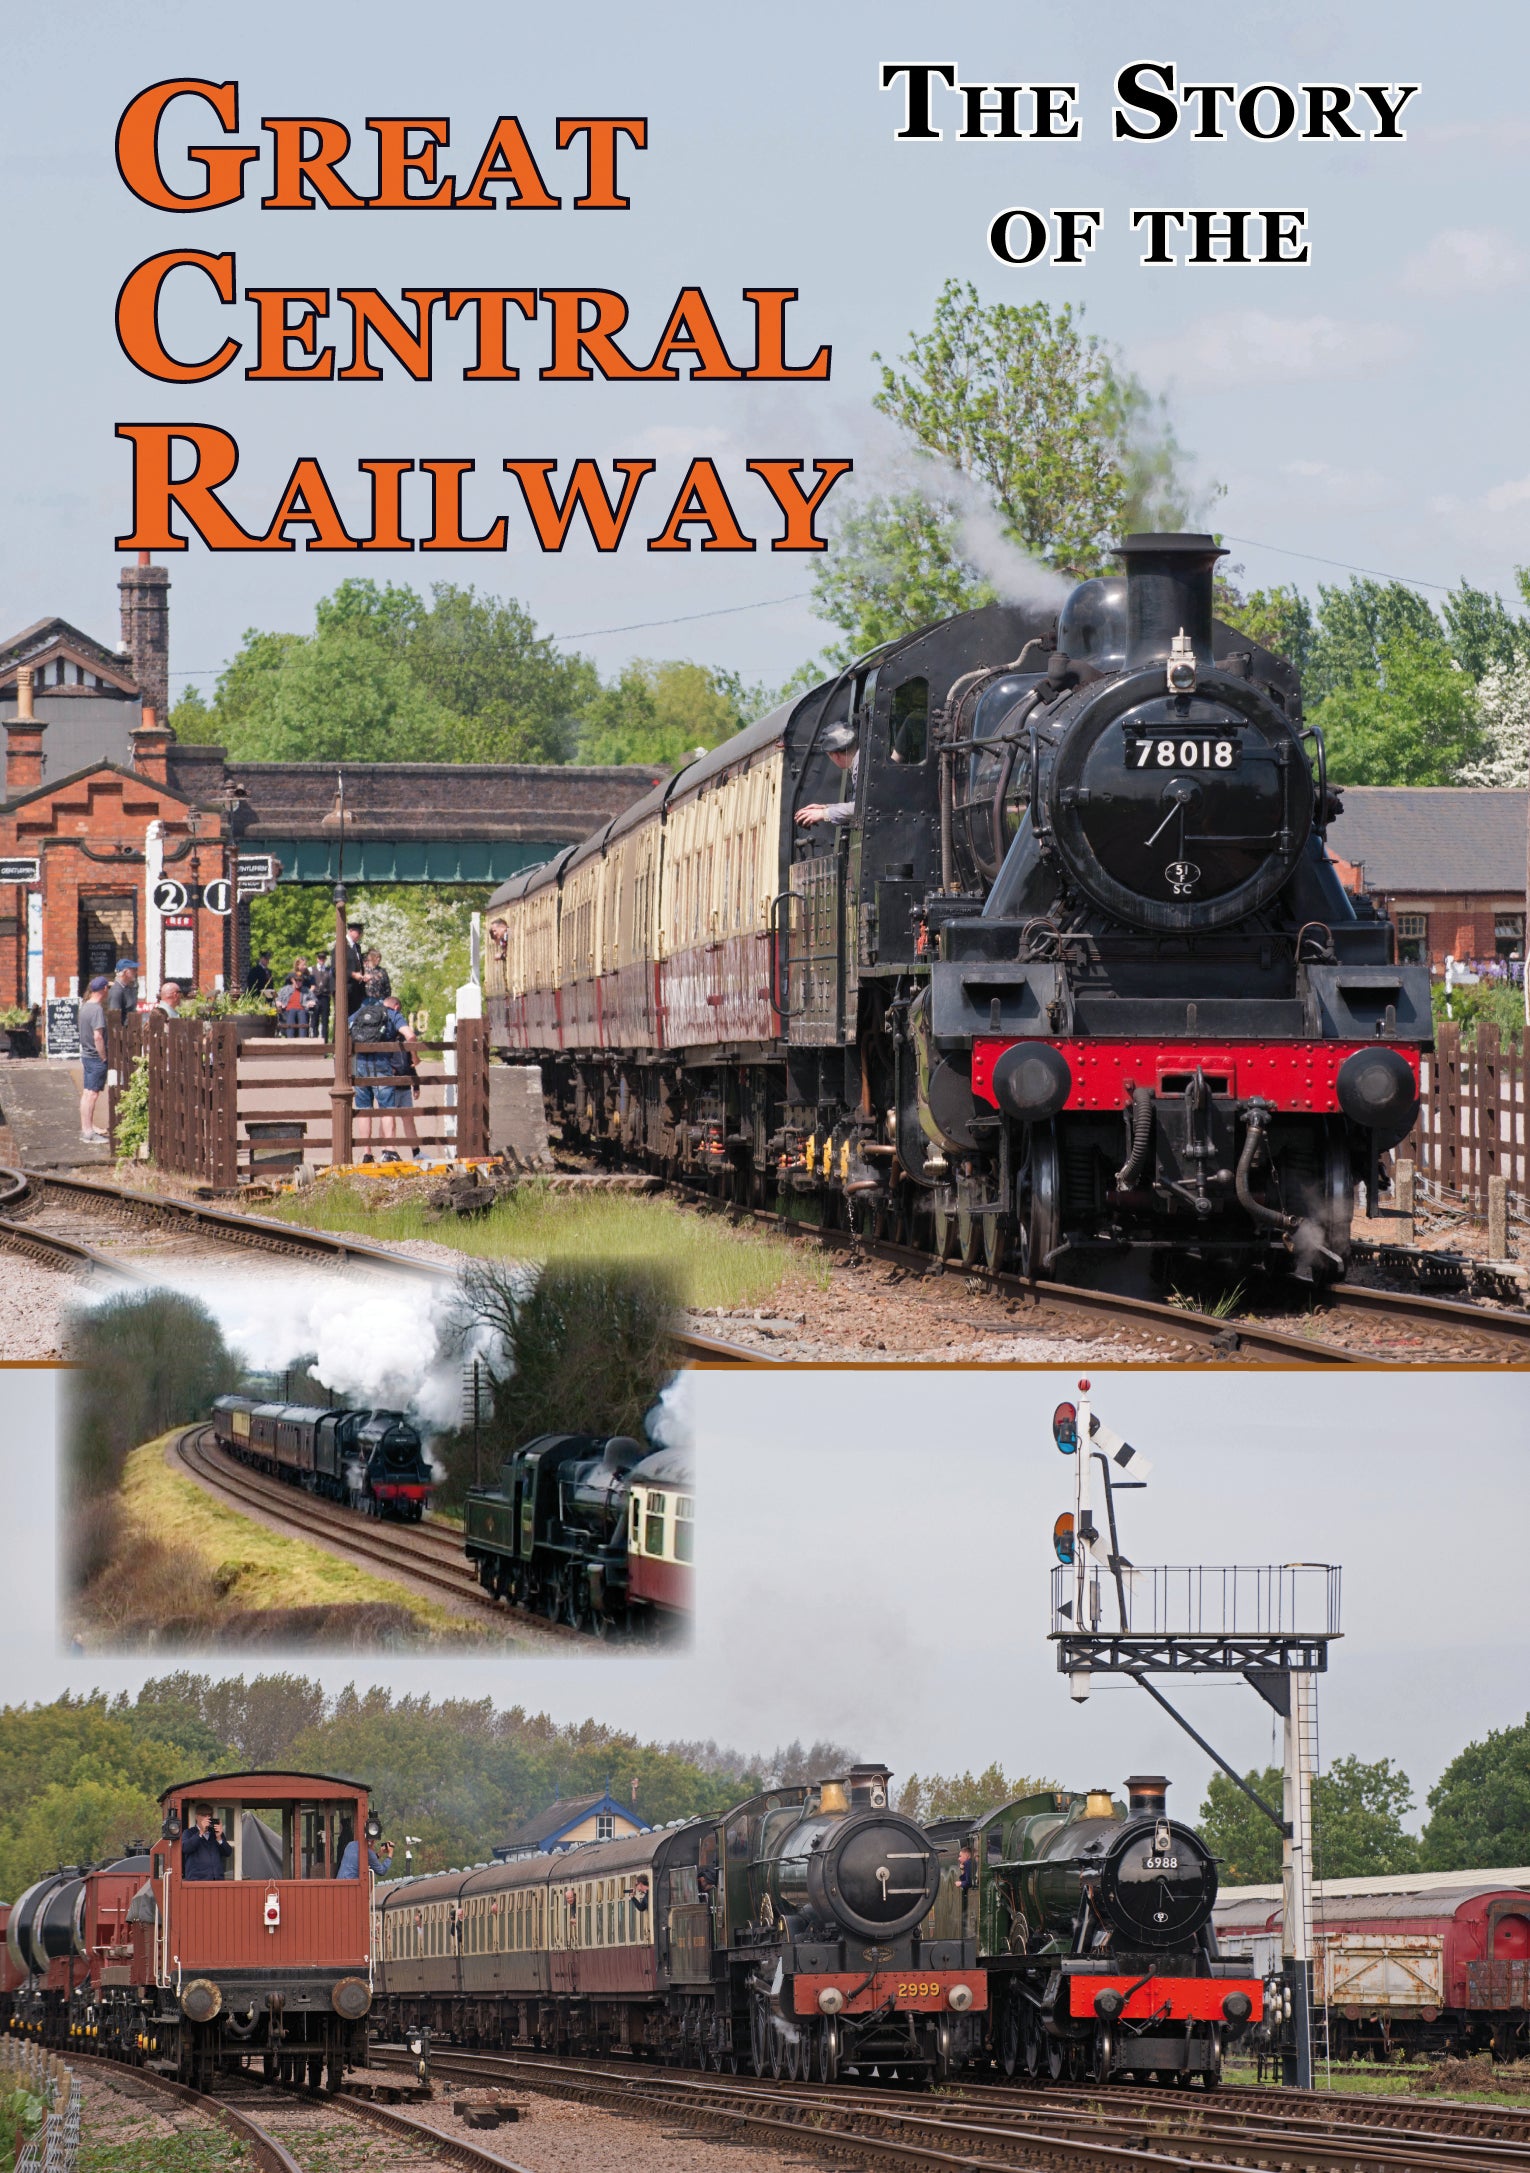 DVD Story of the Great Central Railway